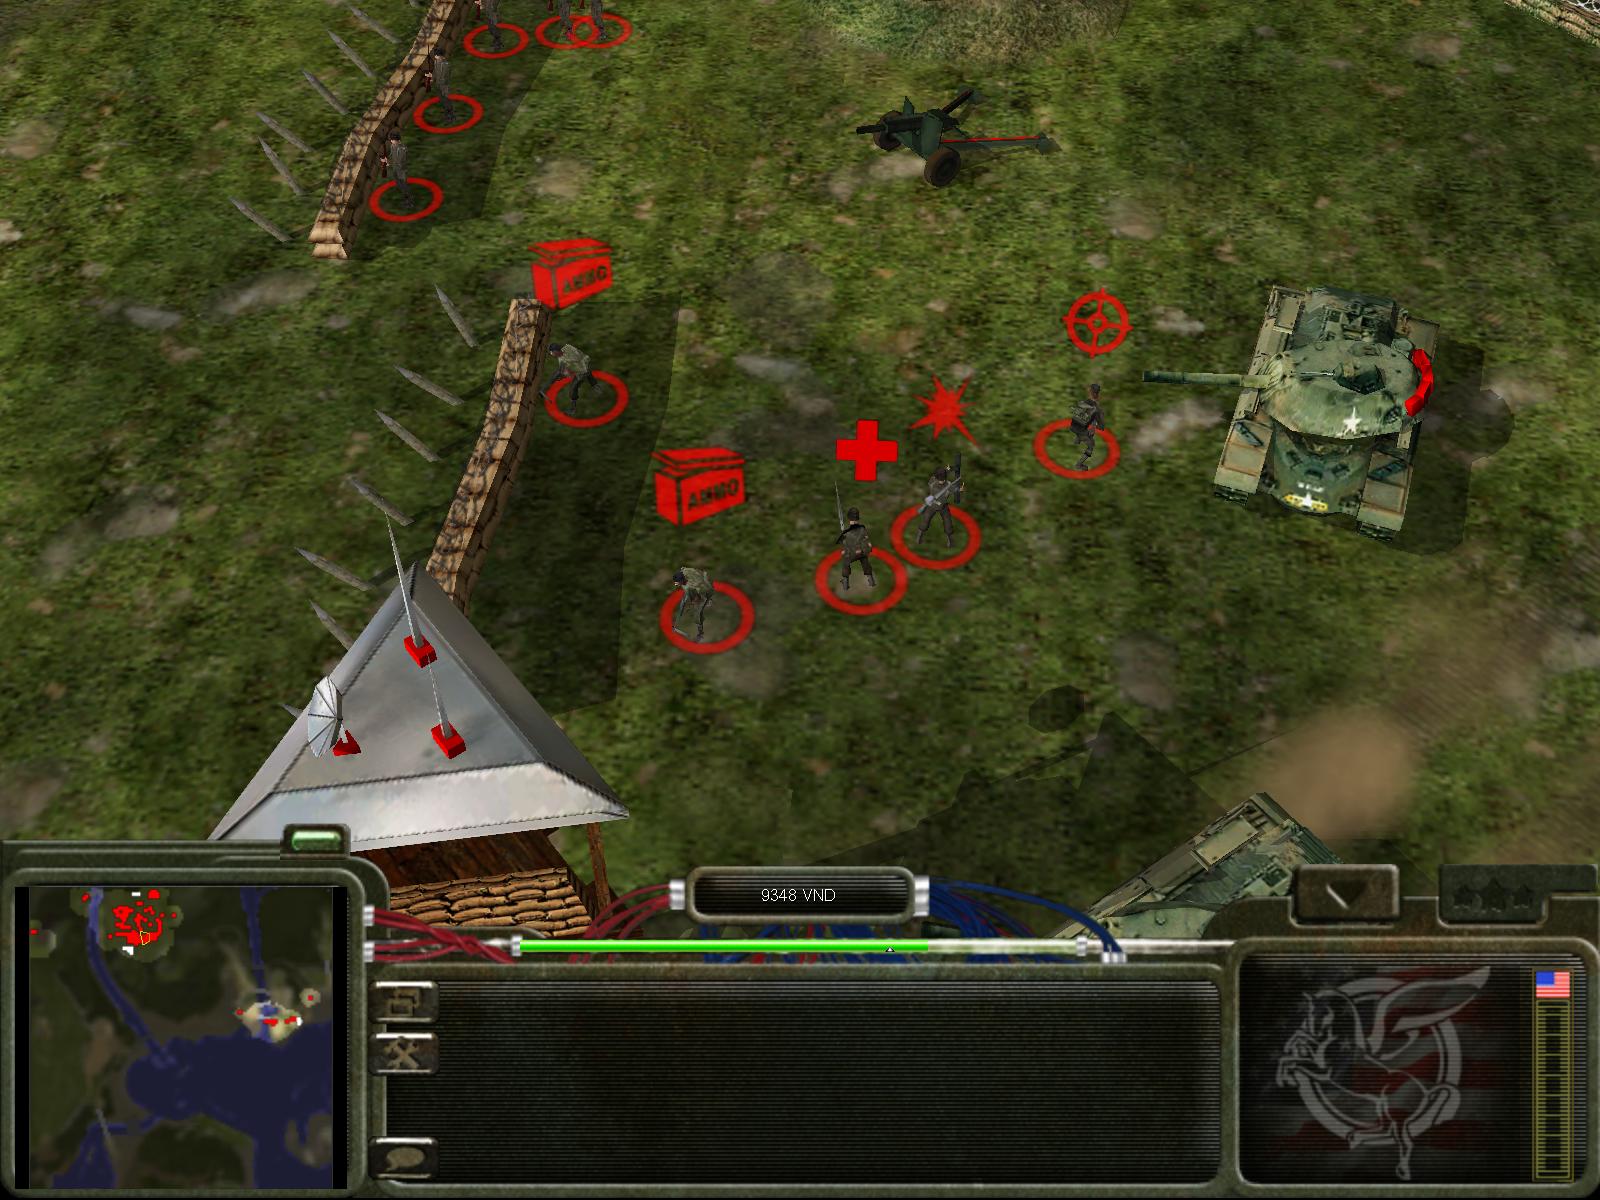 generals command and conquer free download windows 10